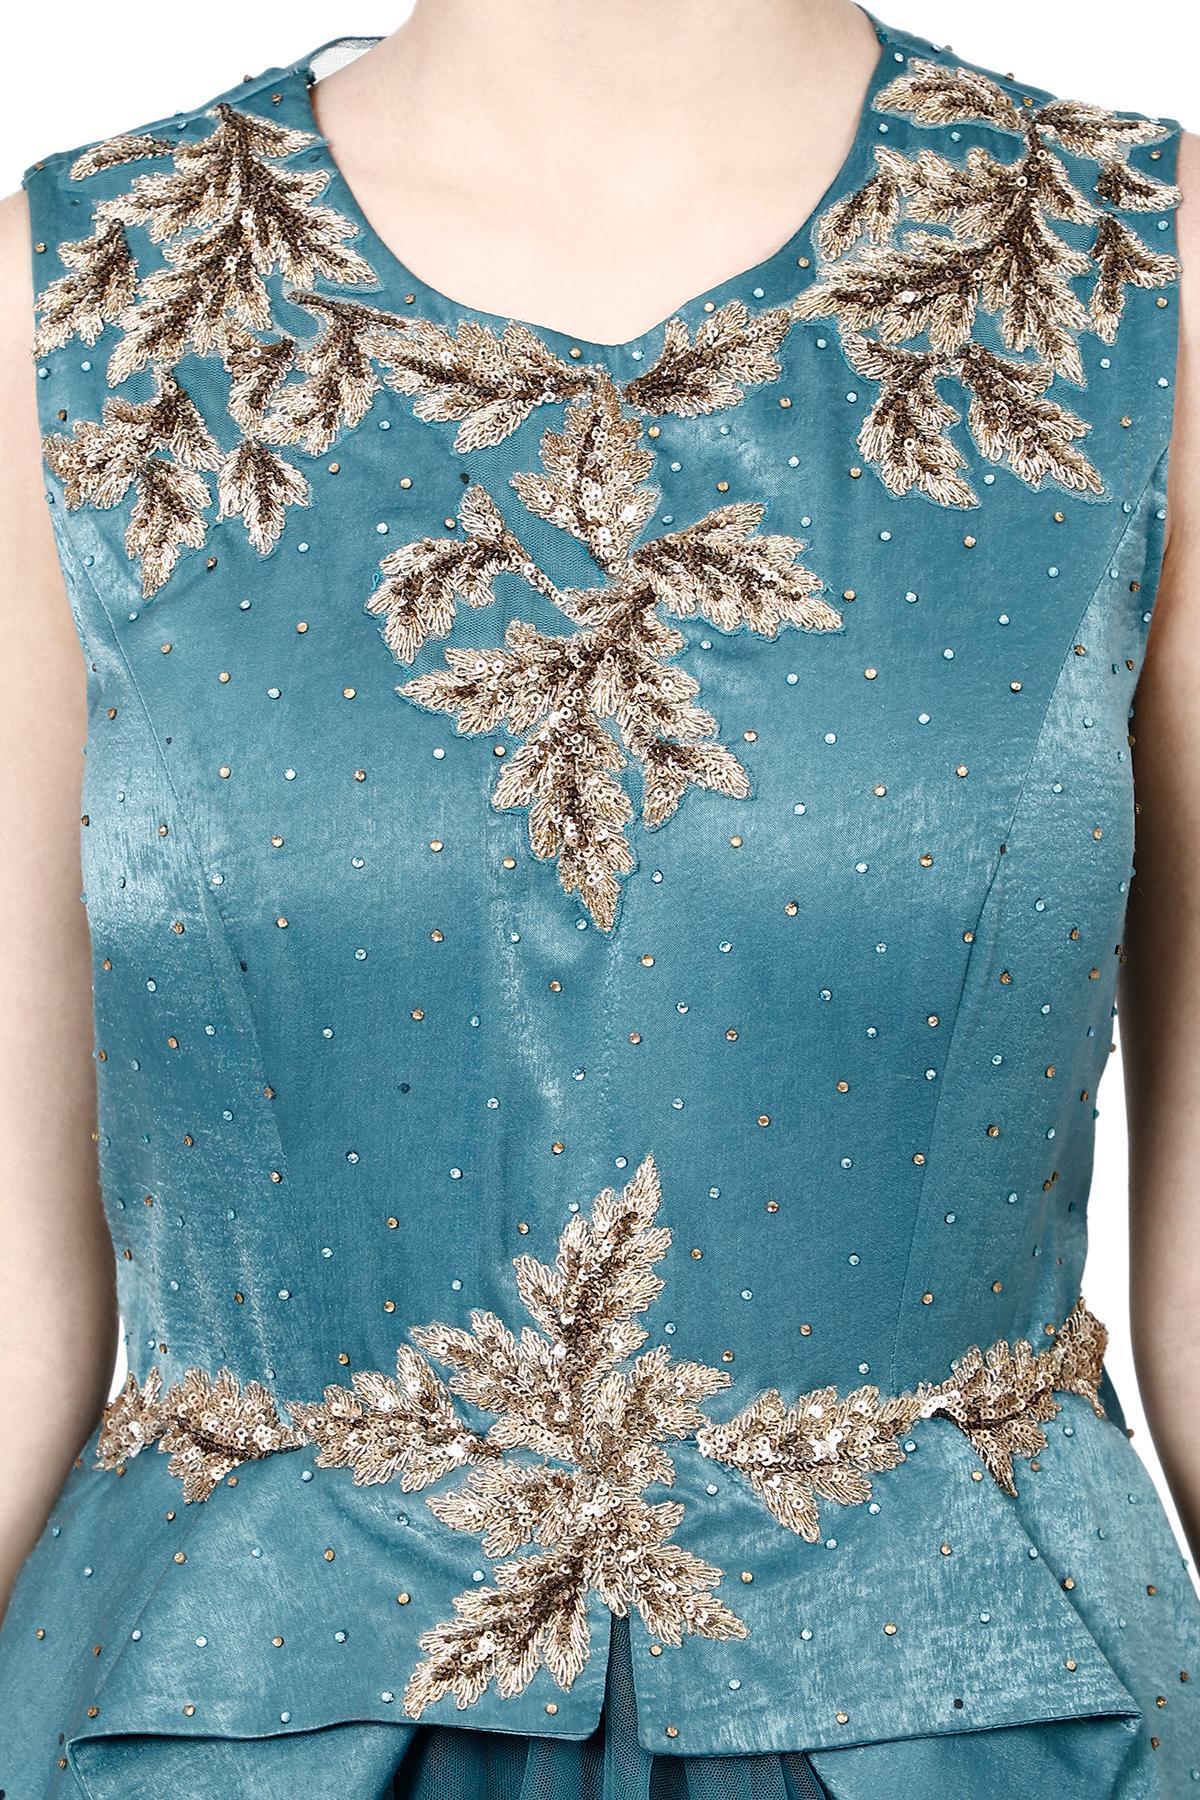 Peplum Dress - Form Fitted Style / Flounced at Waist / Shapely / Blue